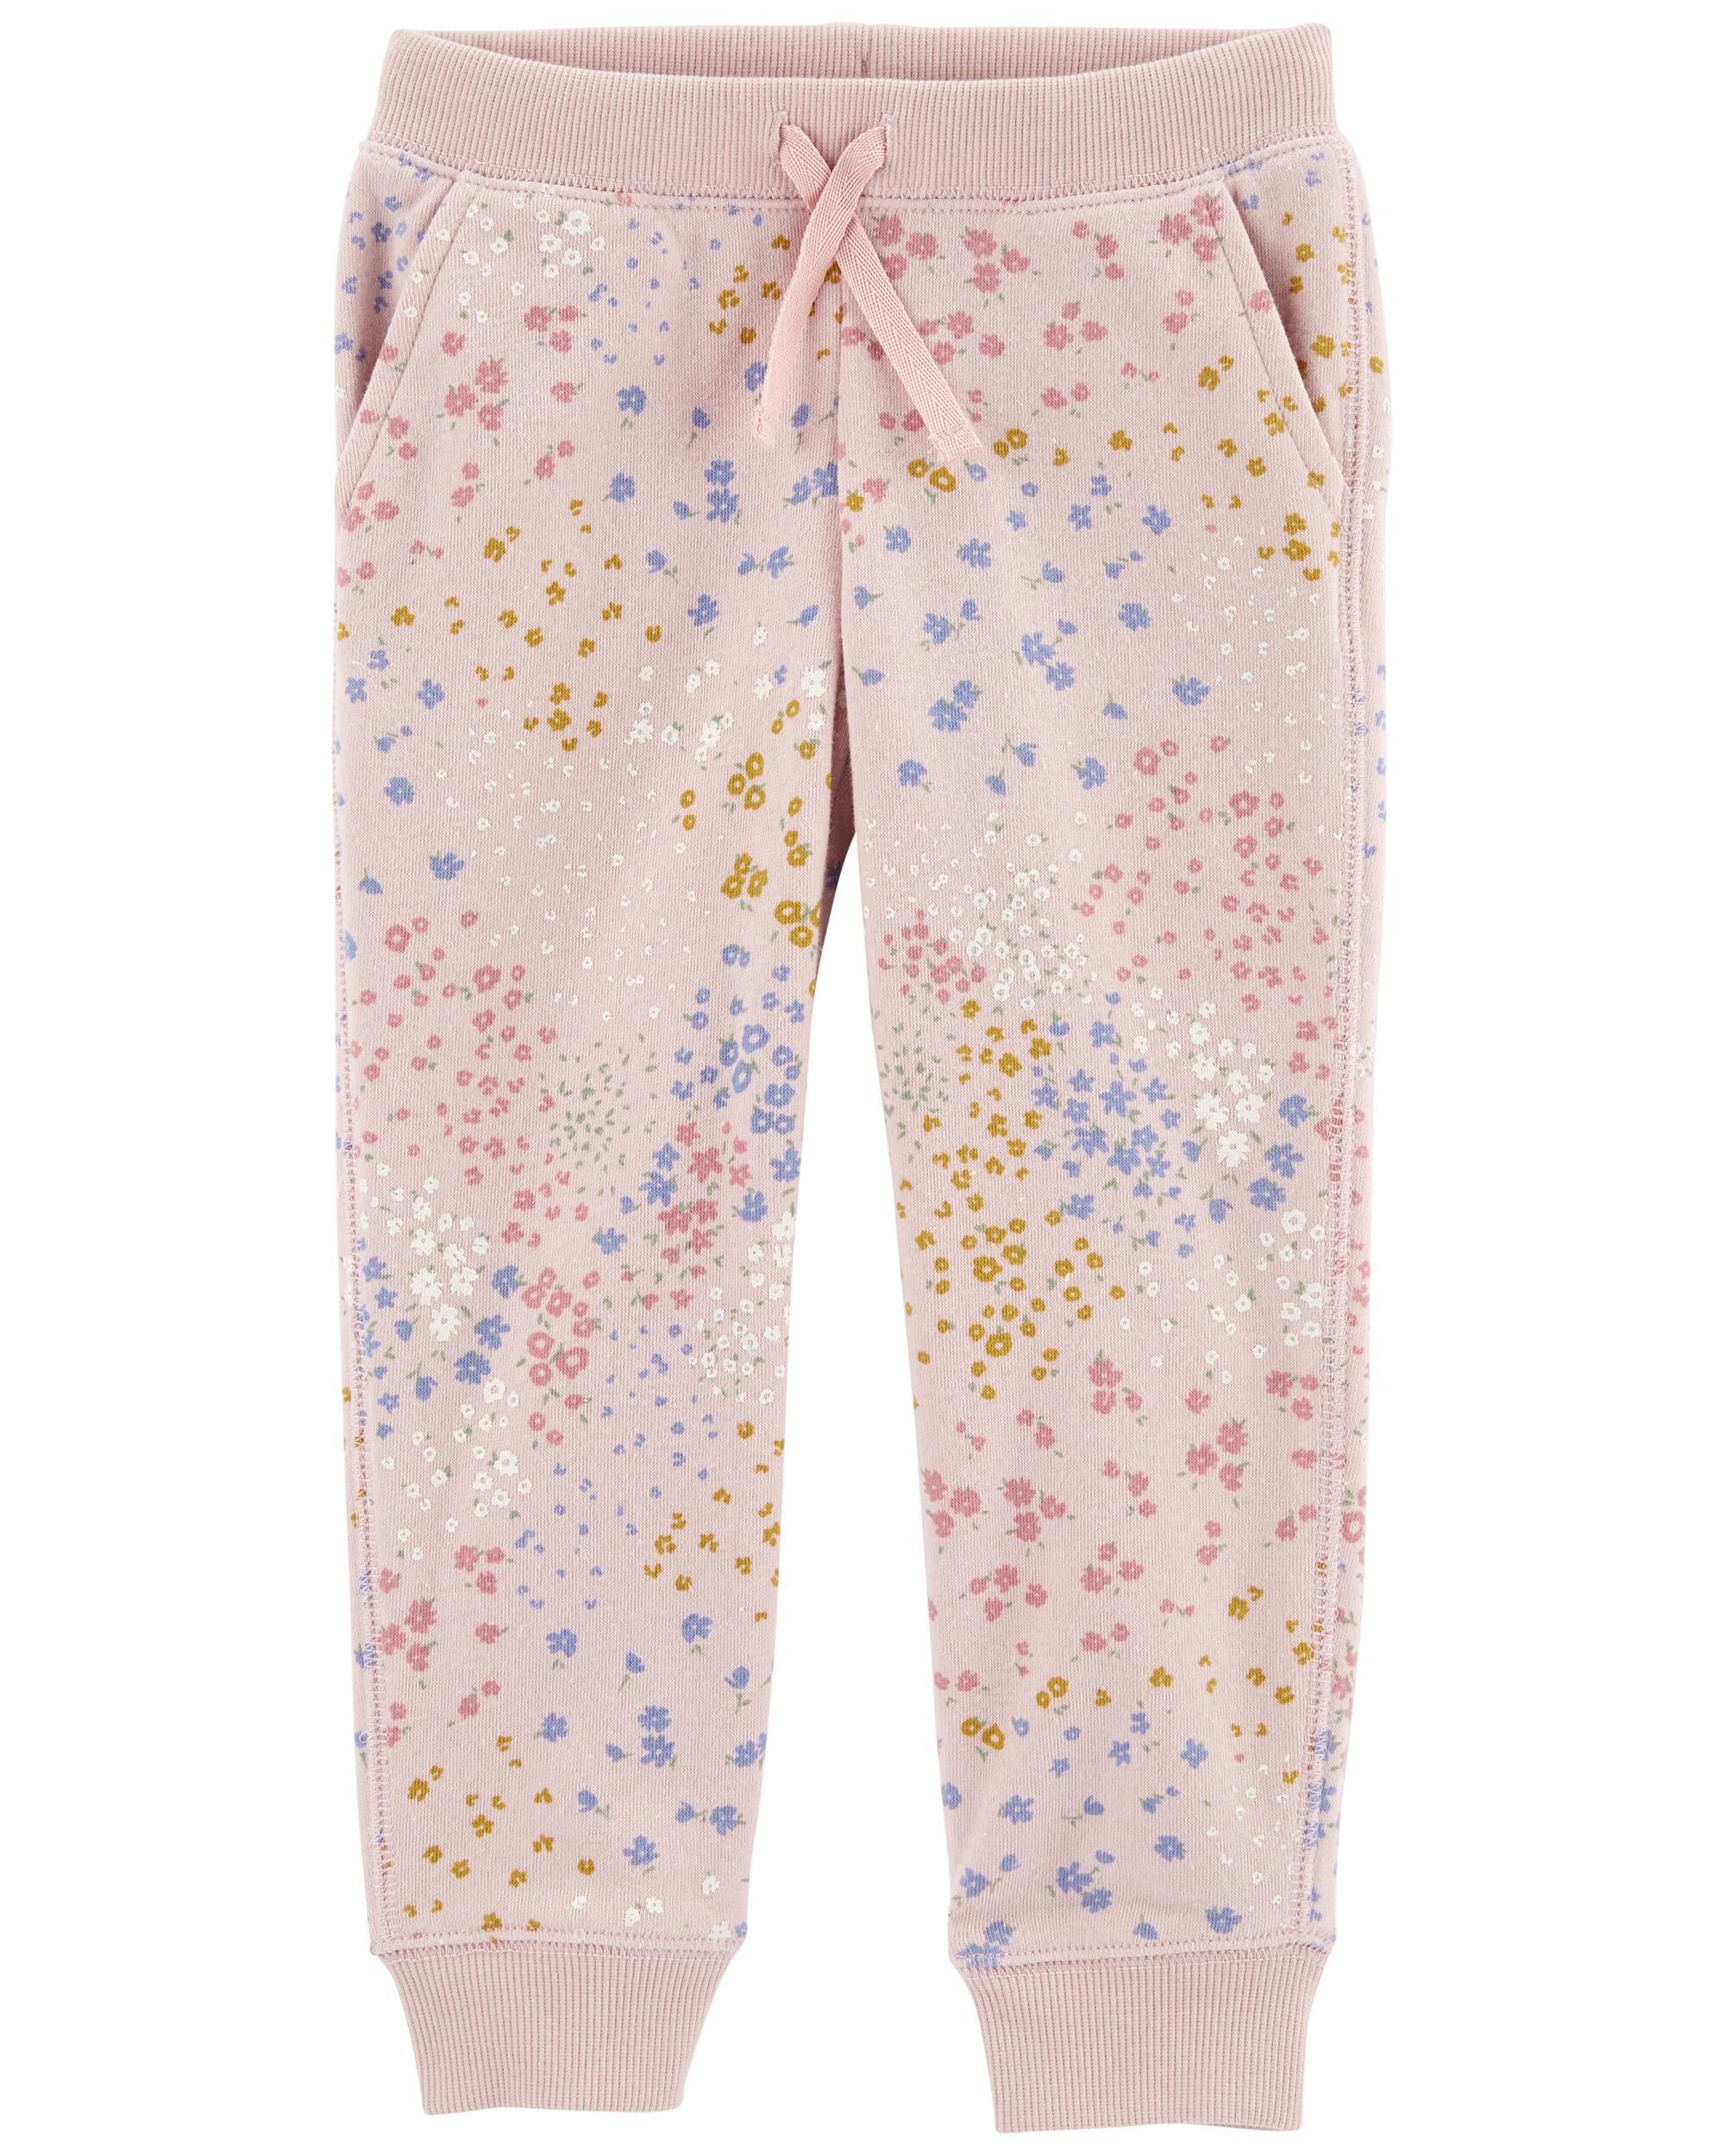 Carters Baby Pull-On Floral Print Fleece Pants